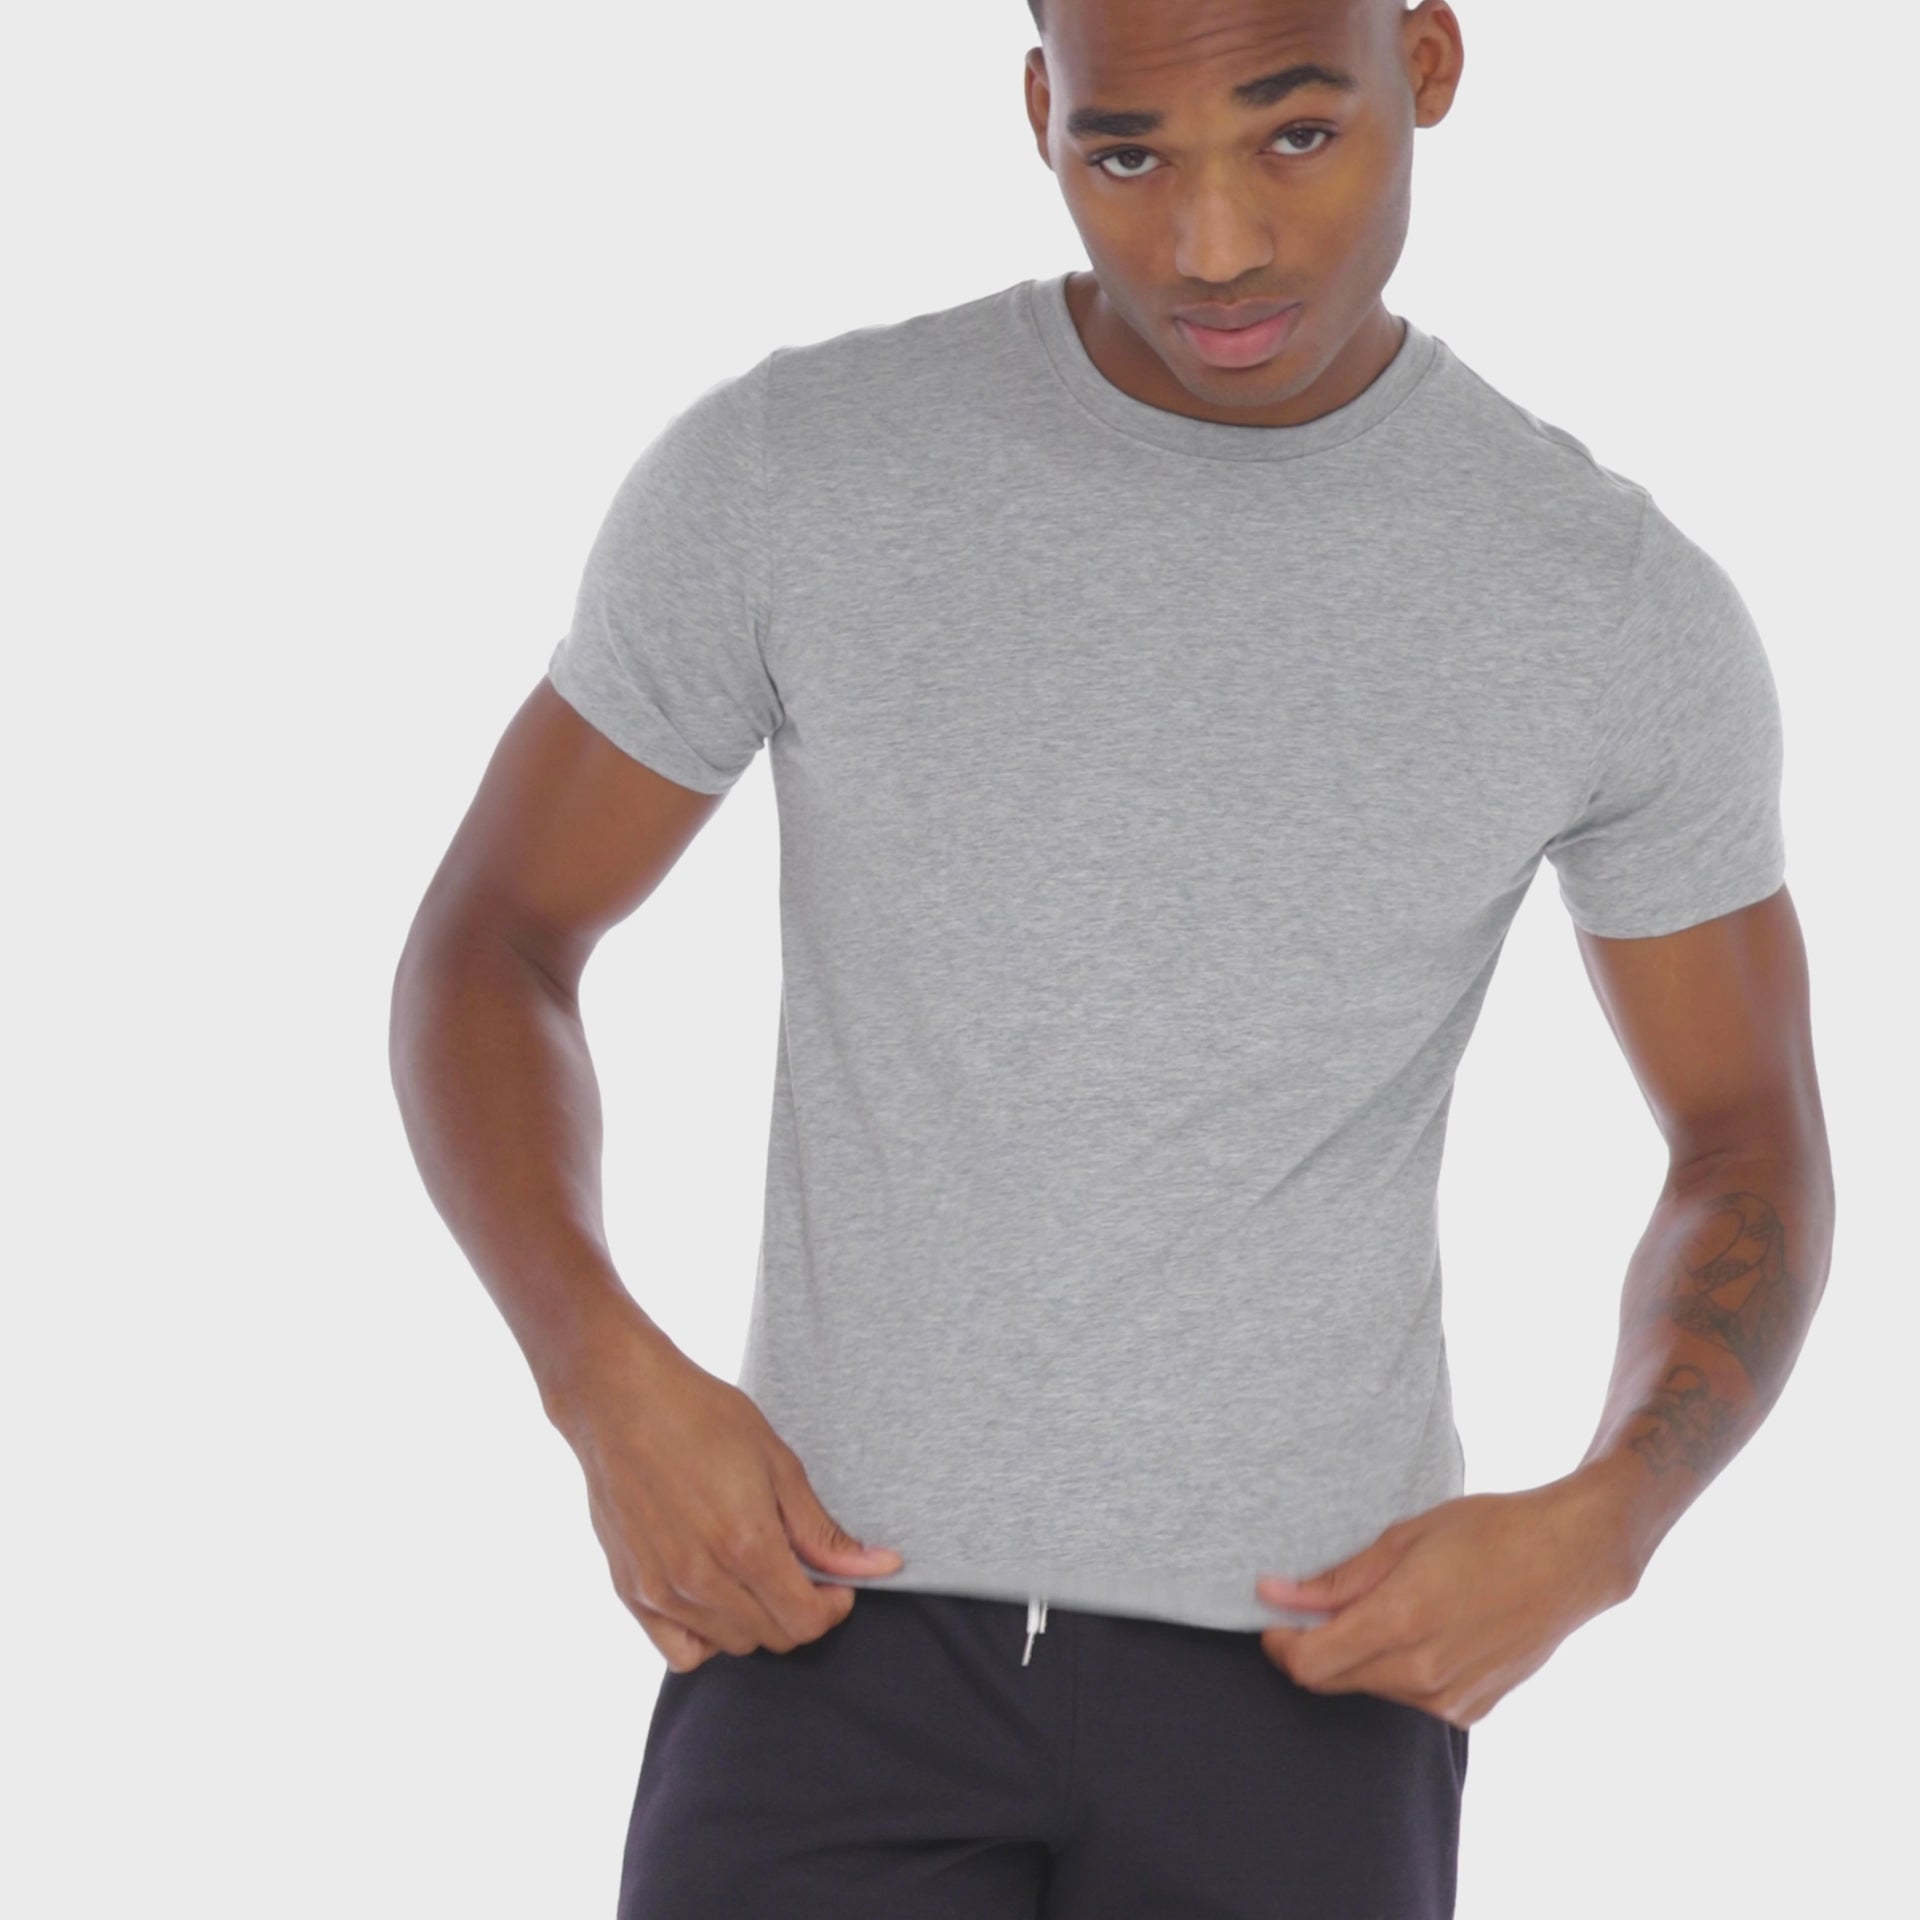 A WHITE WALL VIDEO OF A MALE MODEL WEARING A SAMMY SHOP UNISEX GRAY EVERYDAY T-SHIRT